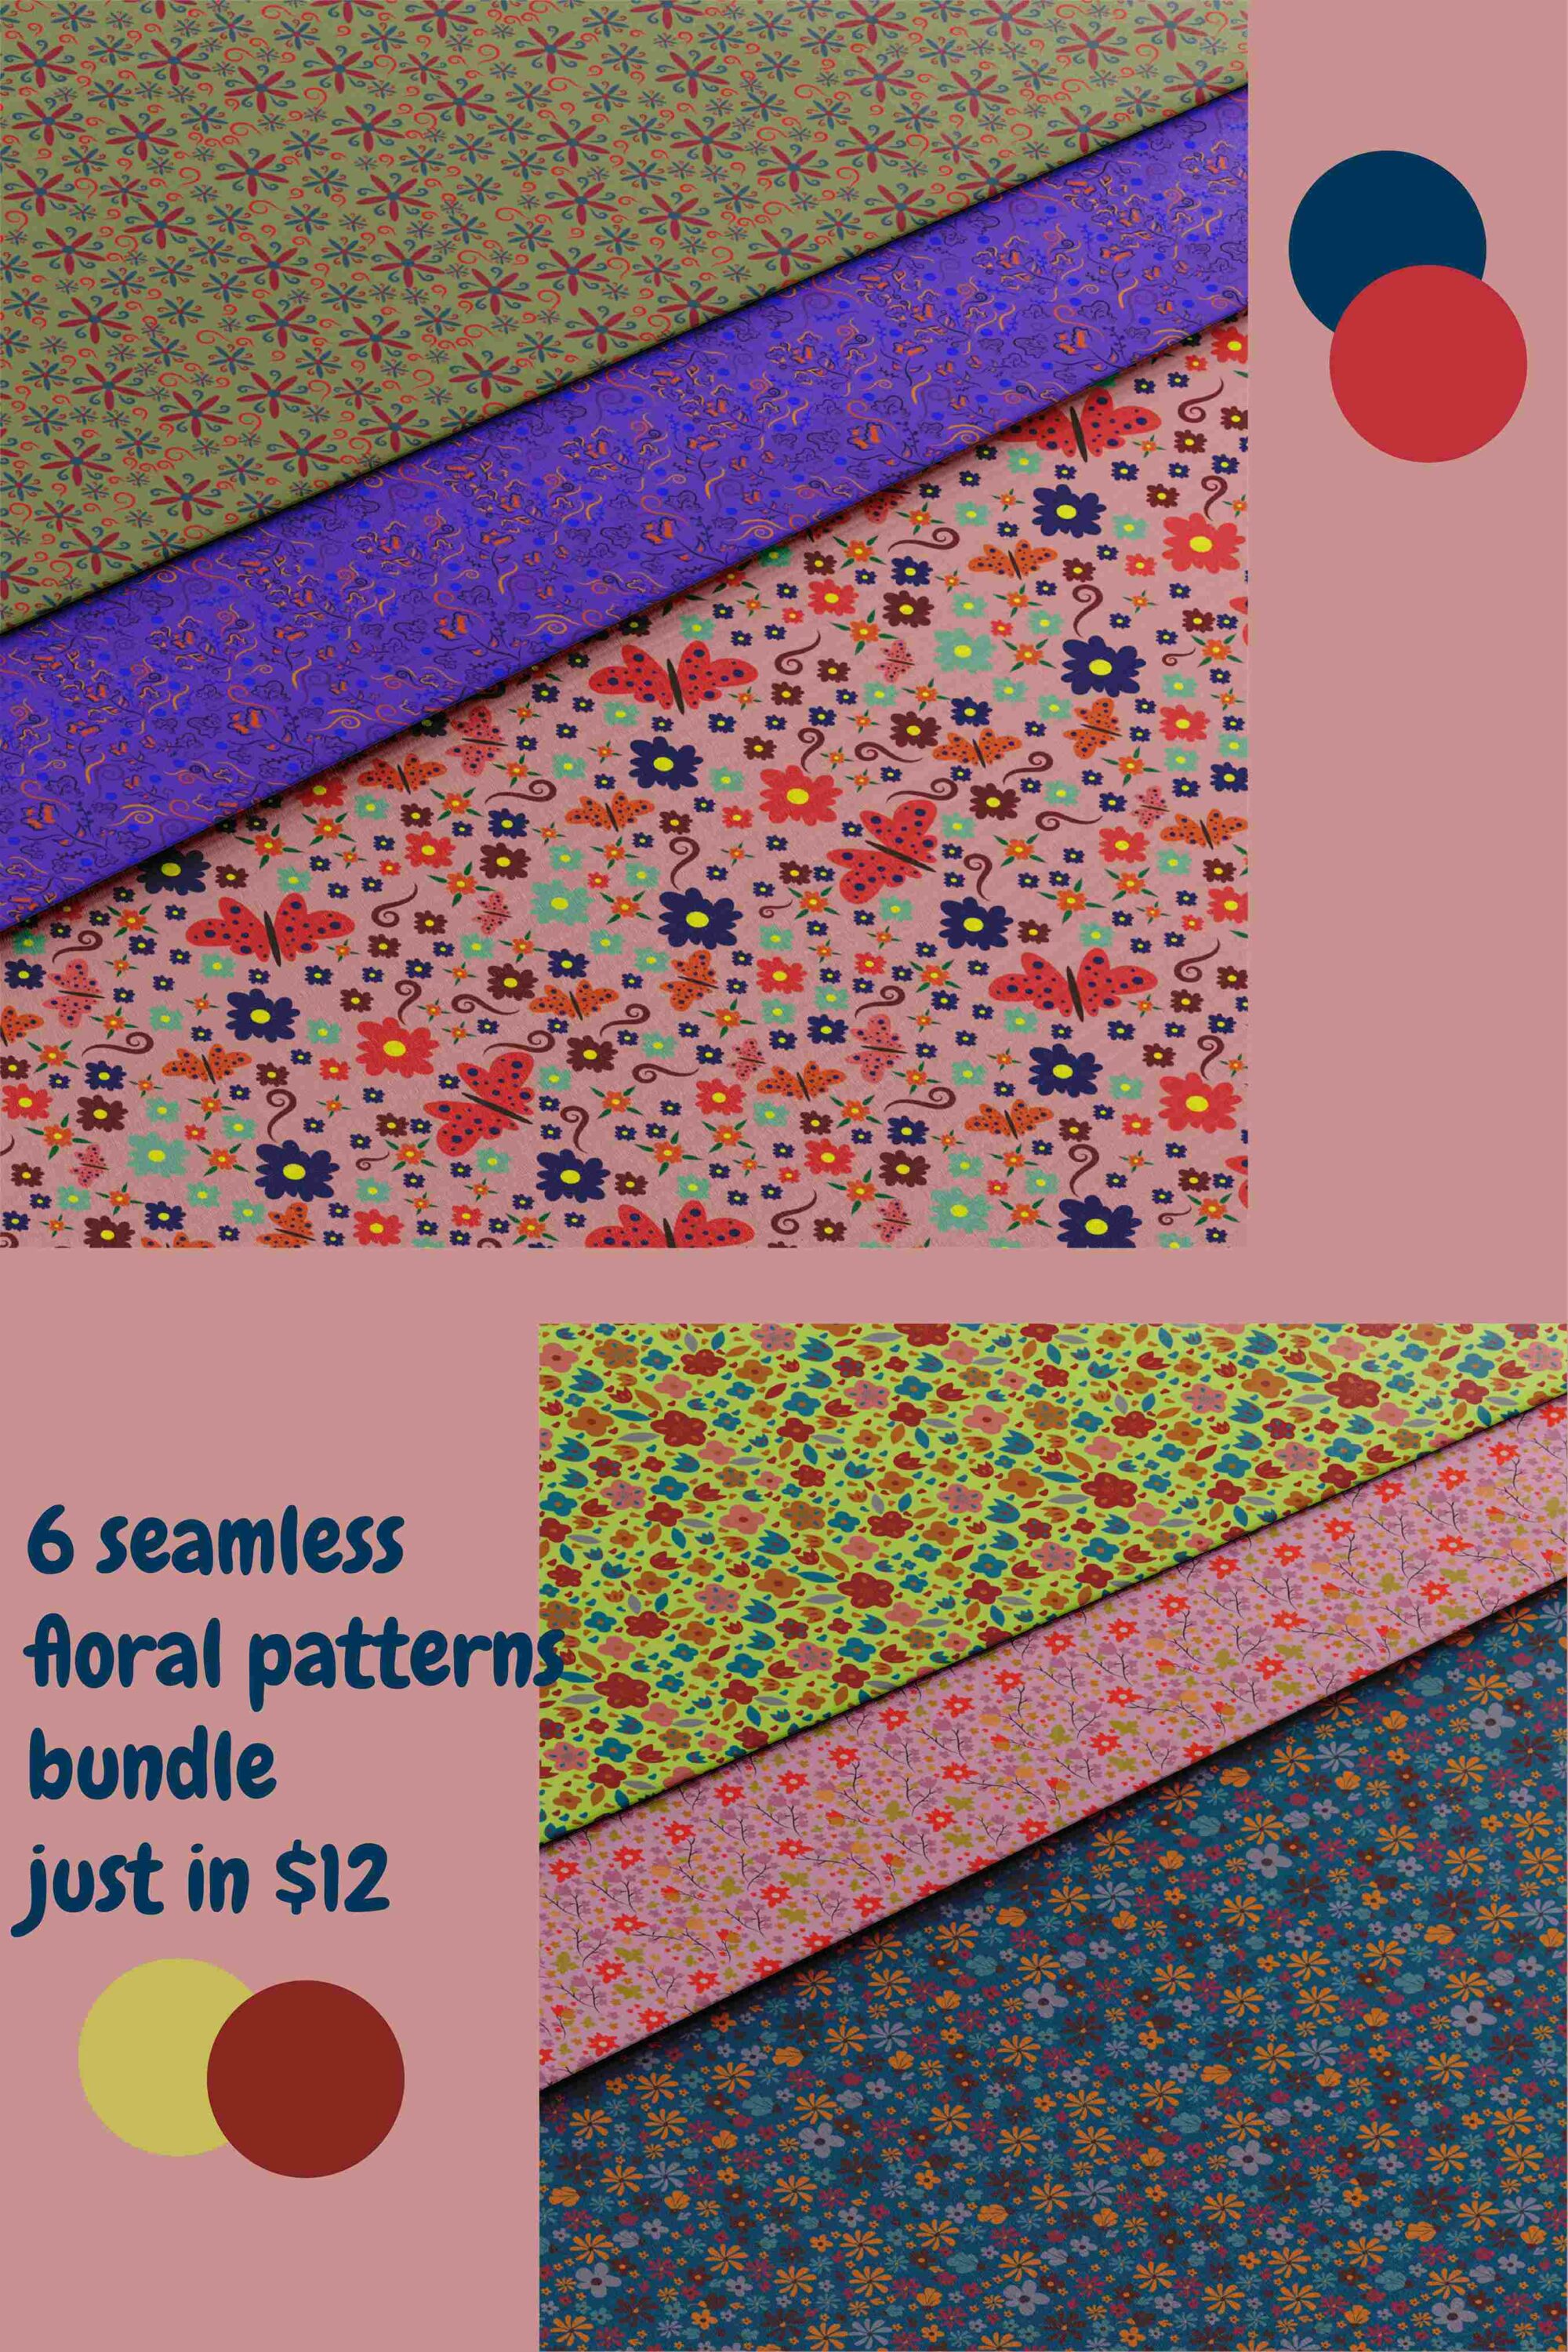 6 Seamless Floral Patterns Only in $12 pinterest image.